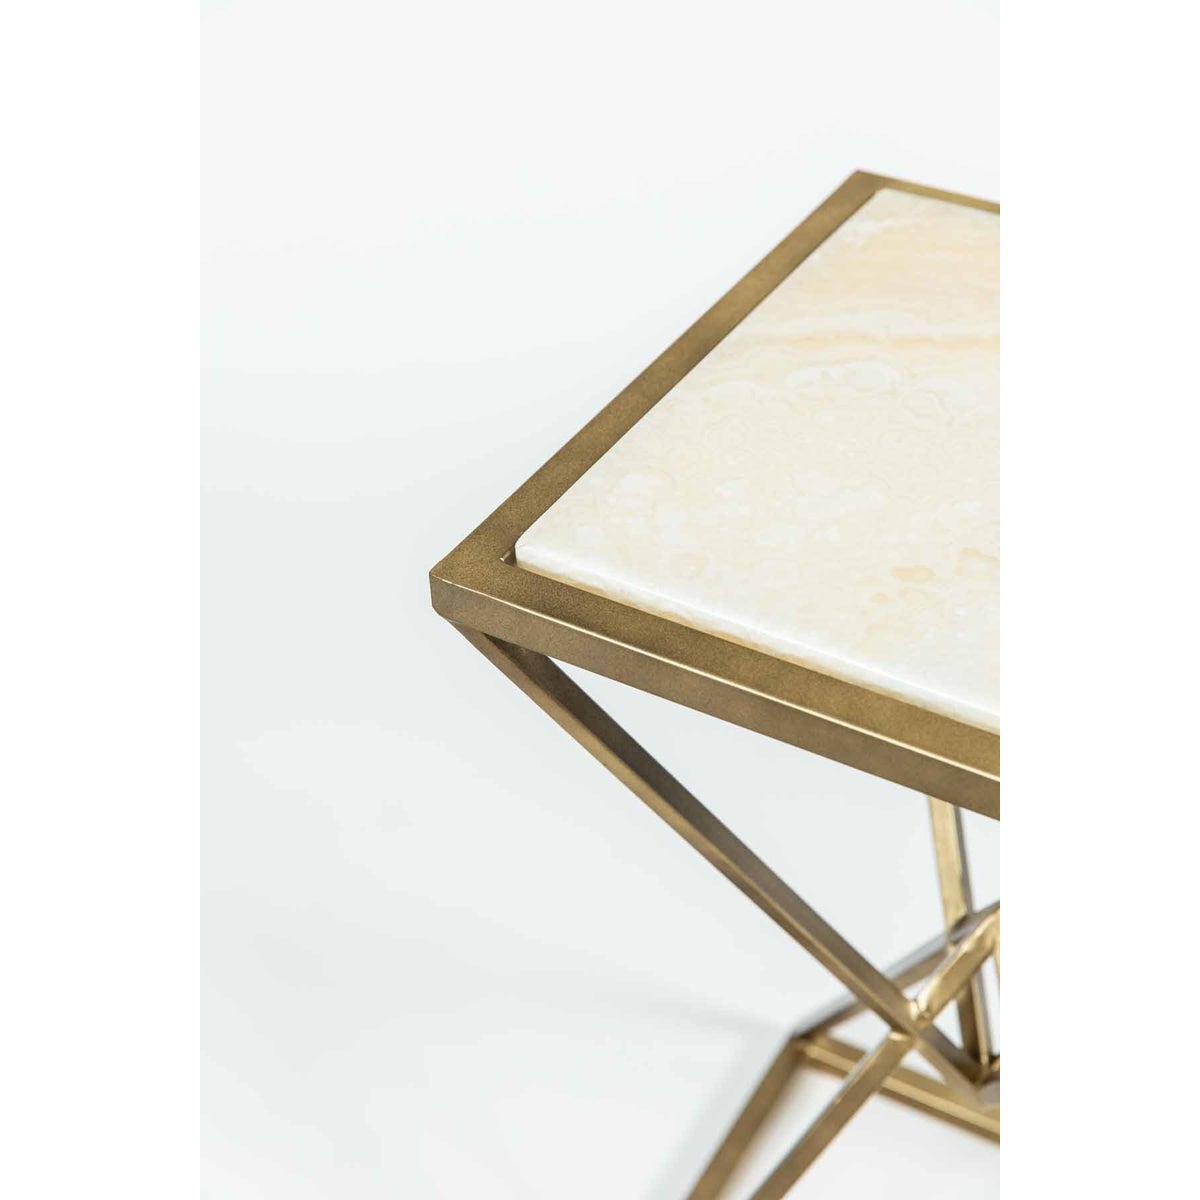 Malcolm Accent Table in Antique Brass with Cream Onyx